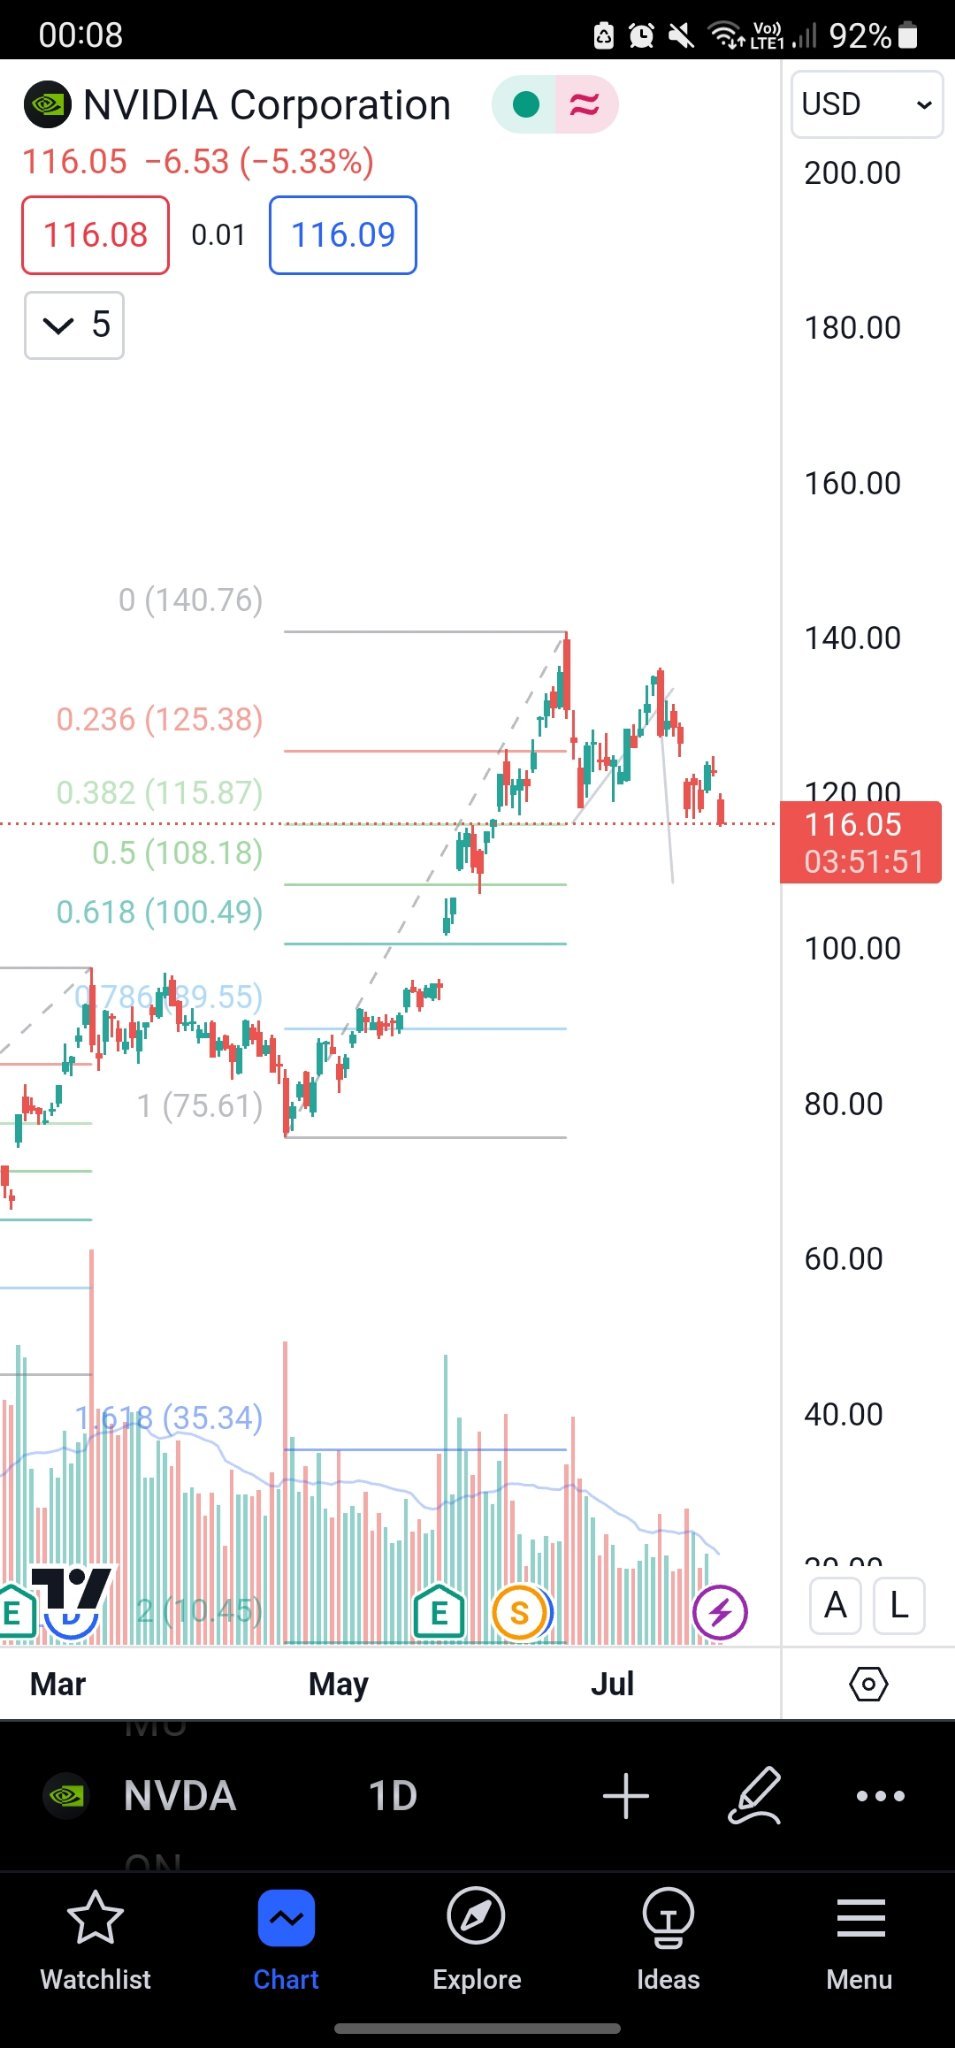 $NVIDIA (NVDA.US)$ Lower high into support. Close below 115 with volume, it's going towards 108. Update note to self: Close at 114.25, the price does visit 108 ...